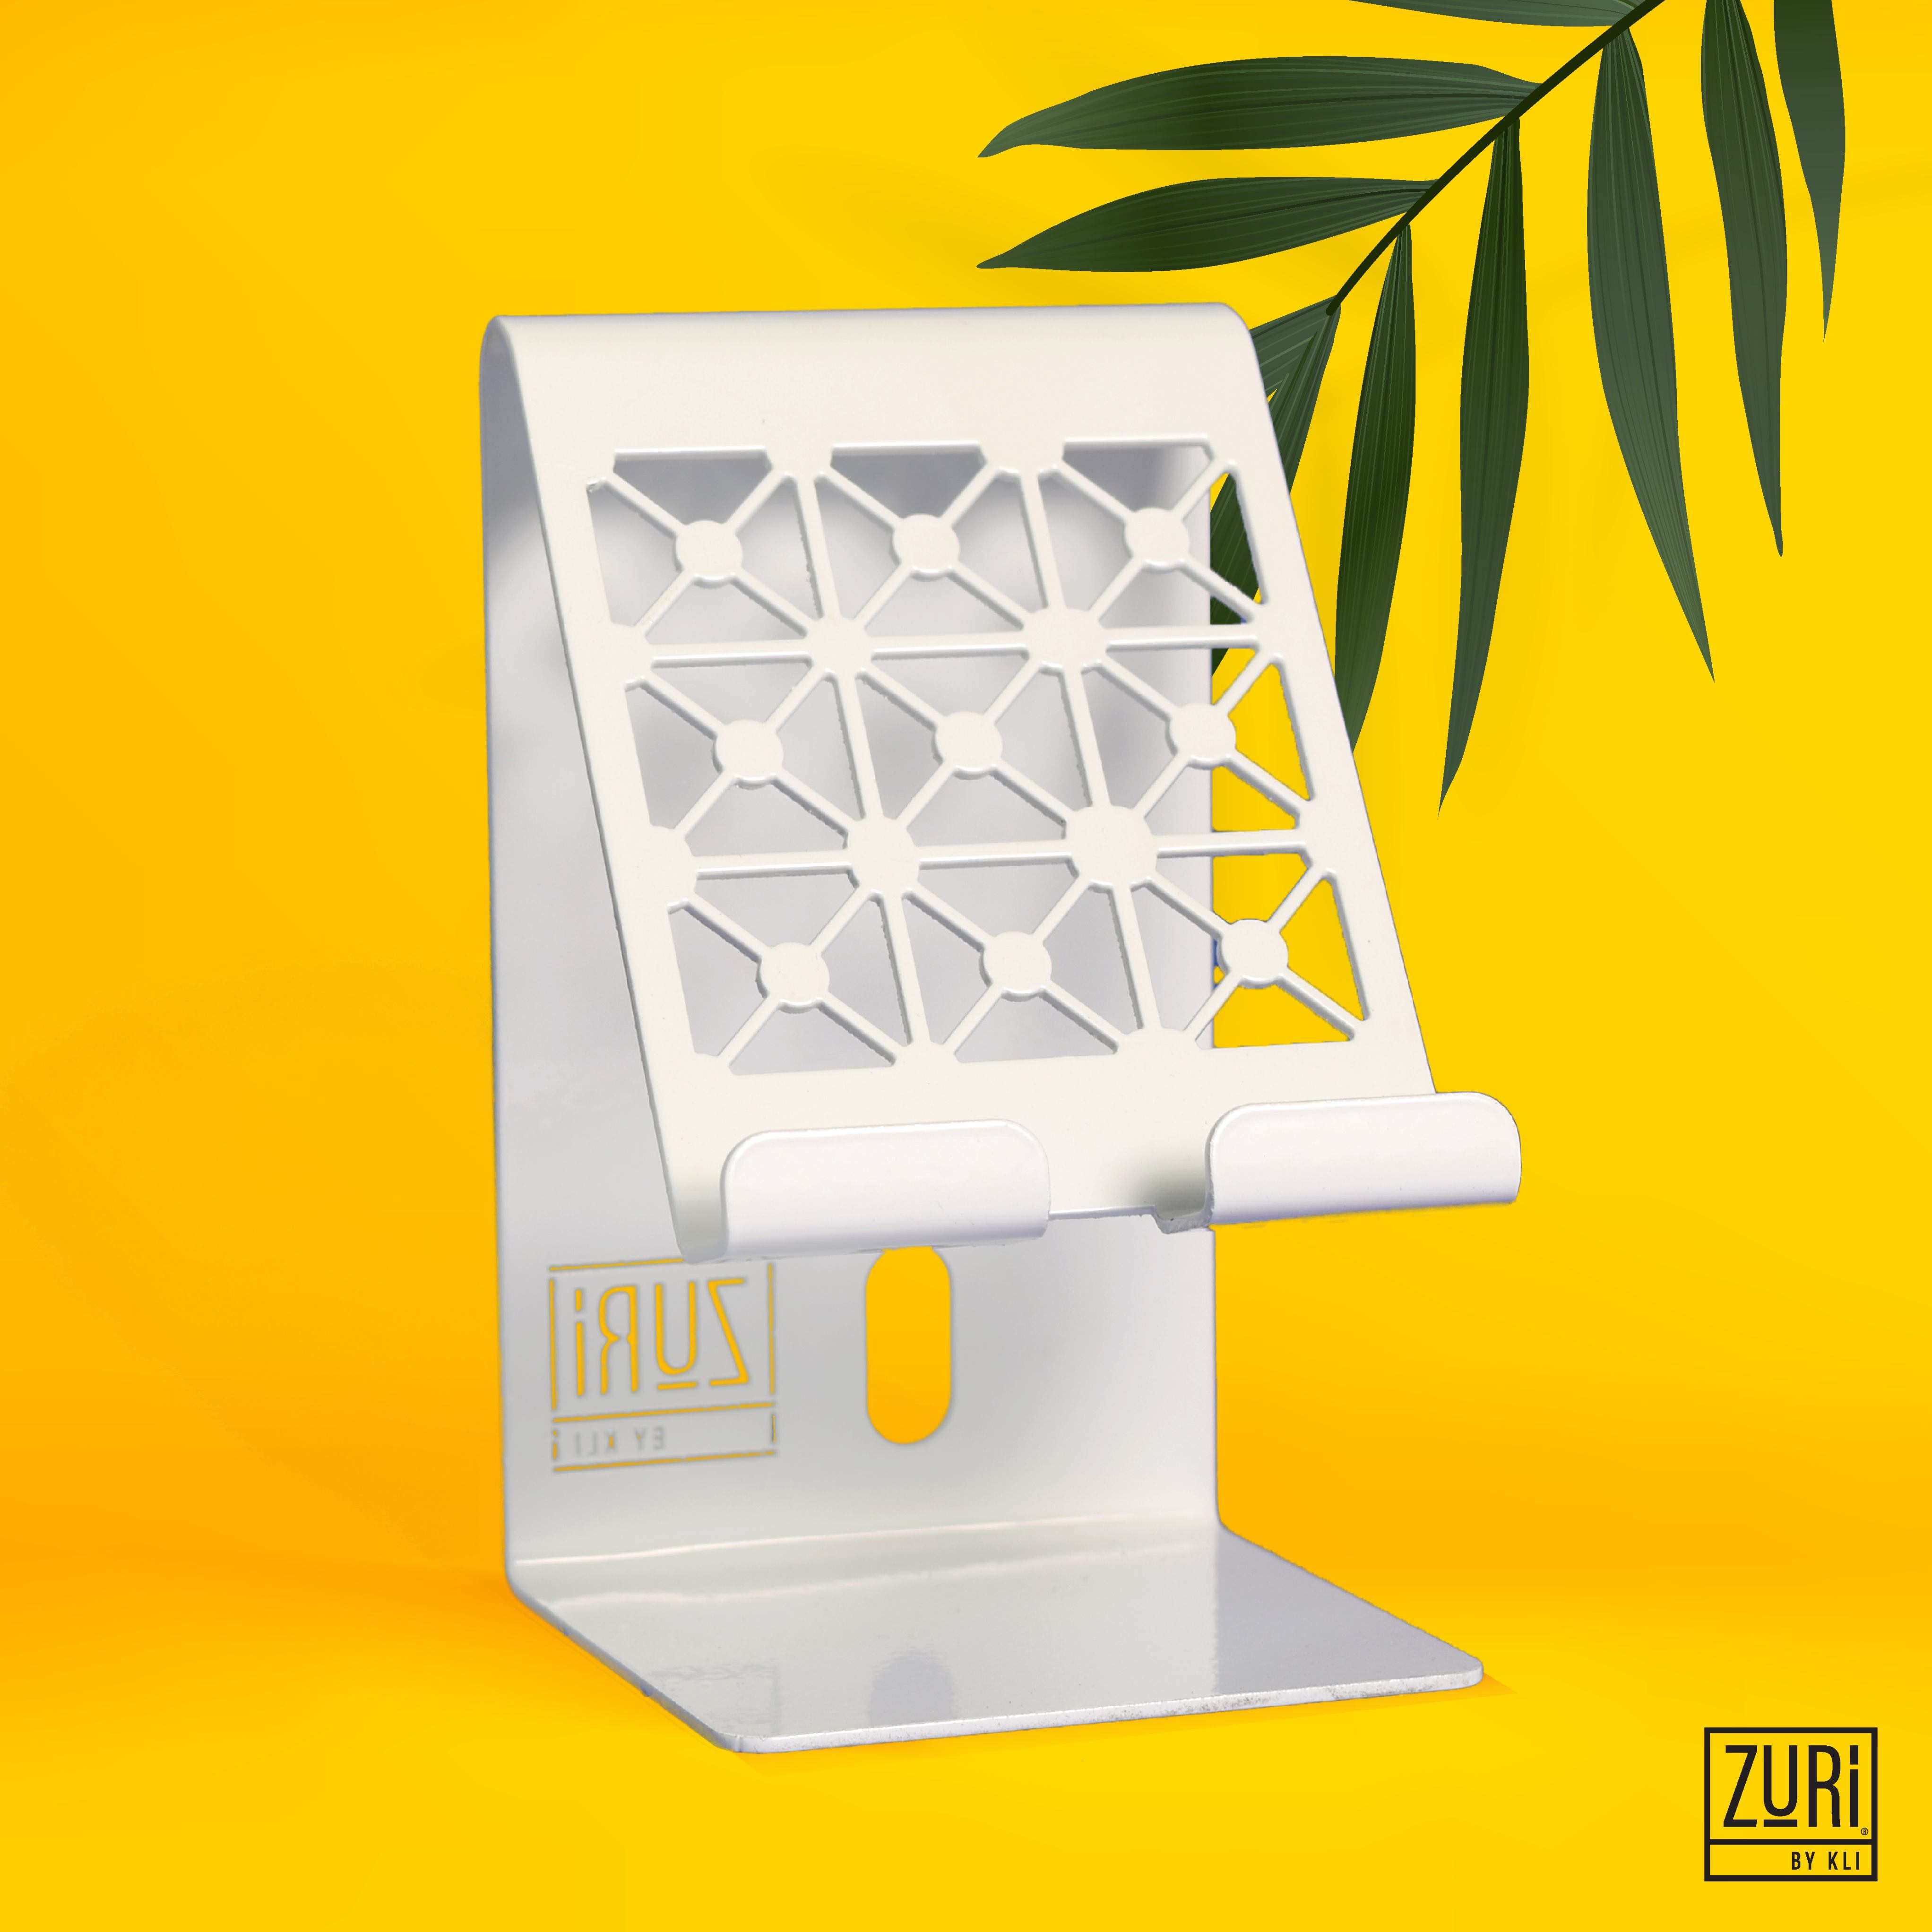 <p>Zuri Desk Mobile Phone Holder (Steel) </p>

<p>This  executive functional mobile phone holder is made of CRCA steel and electrostatically powder coated in either antique copper (Lady Design), antique silver (Geometric Design), arctic white (Geometric Design) or tangerine (Lady Design).</p>

<p>The front features two distinct design patterns and has a rear slot for running a USB charge cable, front slots for speakers and charging point for phones.</p>

<ul>
	<li>Dimensions ( L x W x H) : 8cm x 8cm x 13.5 cm</li>
	<li>Arctic White </li>
</ul>
